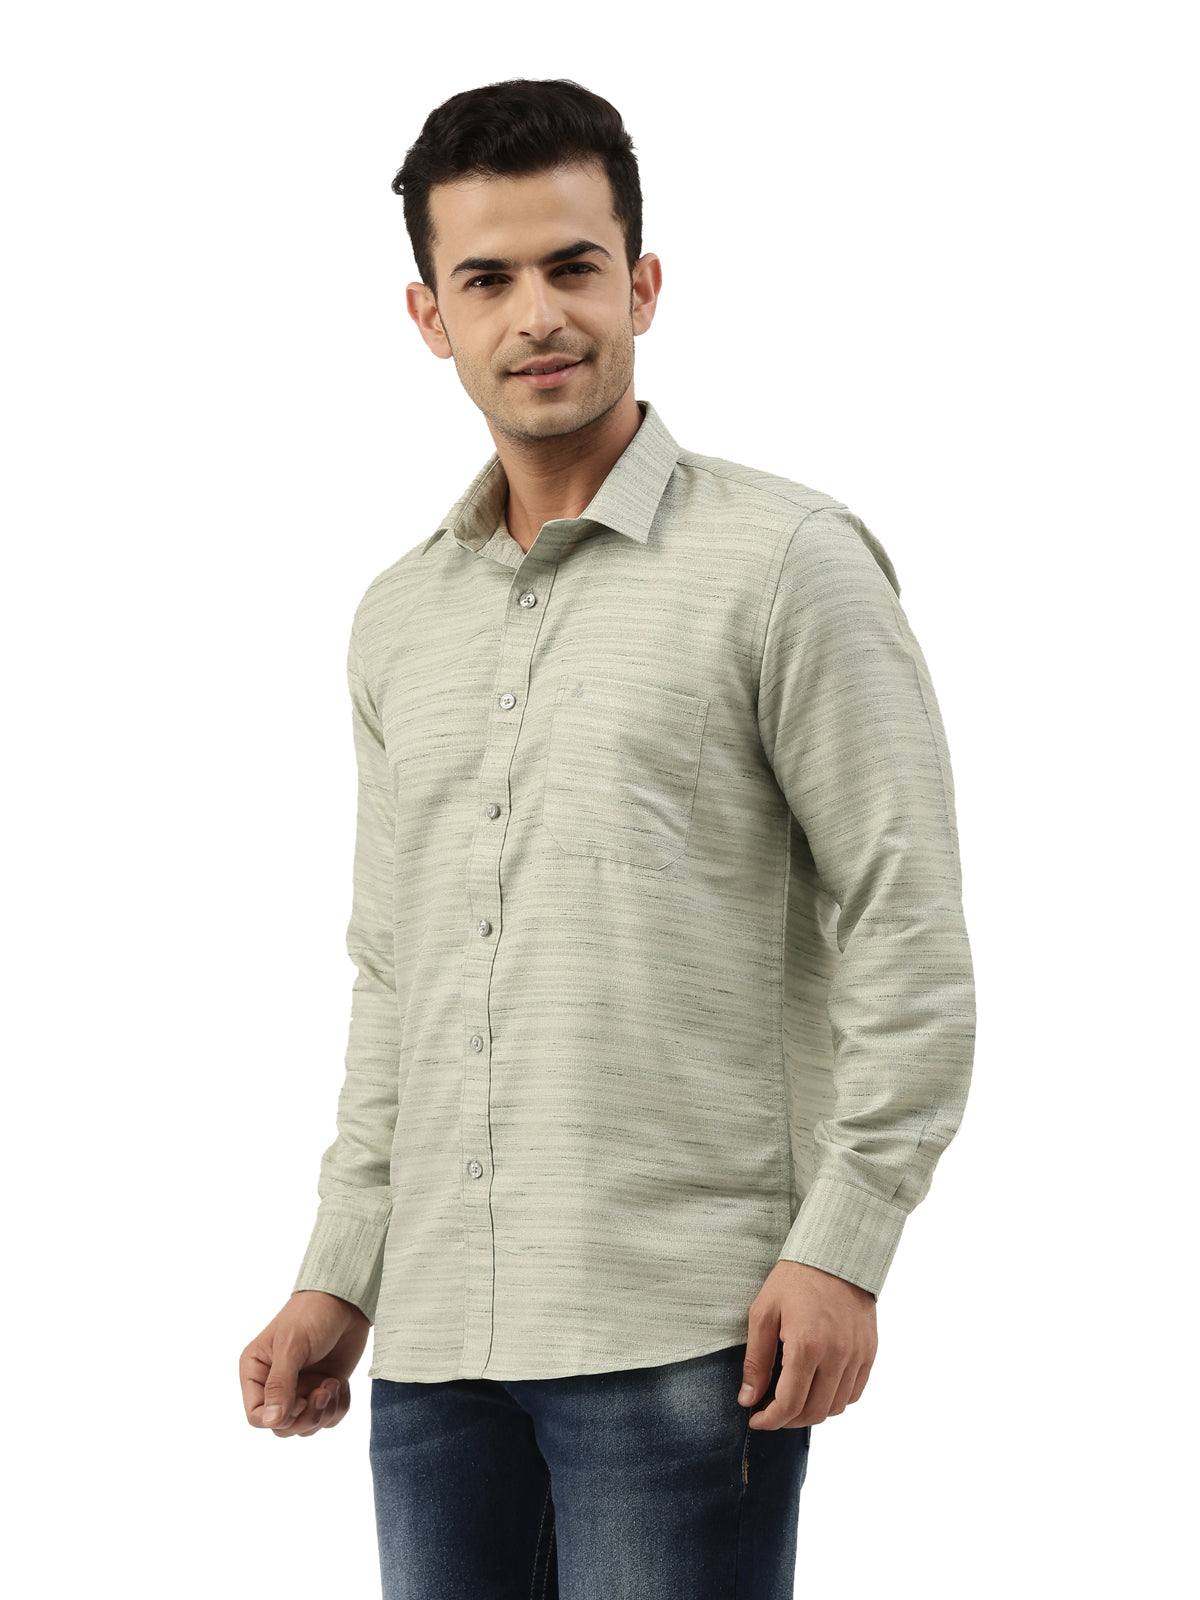 Grey Cotton Slim Fit Solid Party Shirt